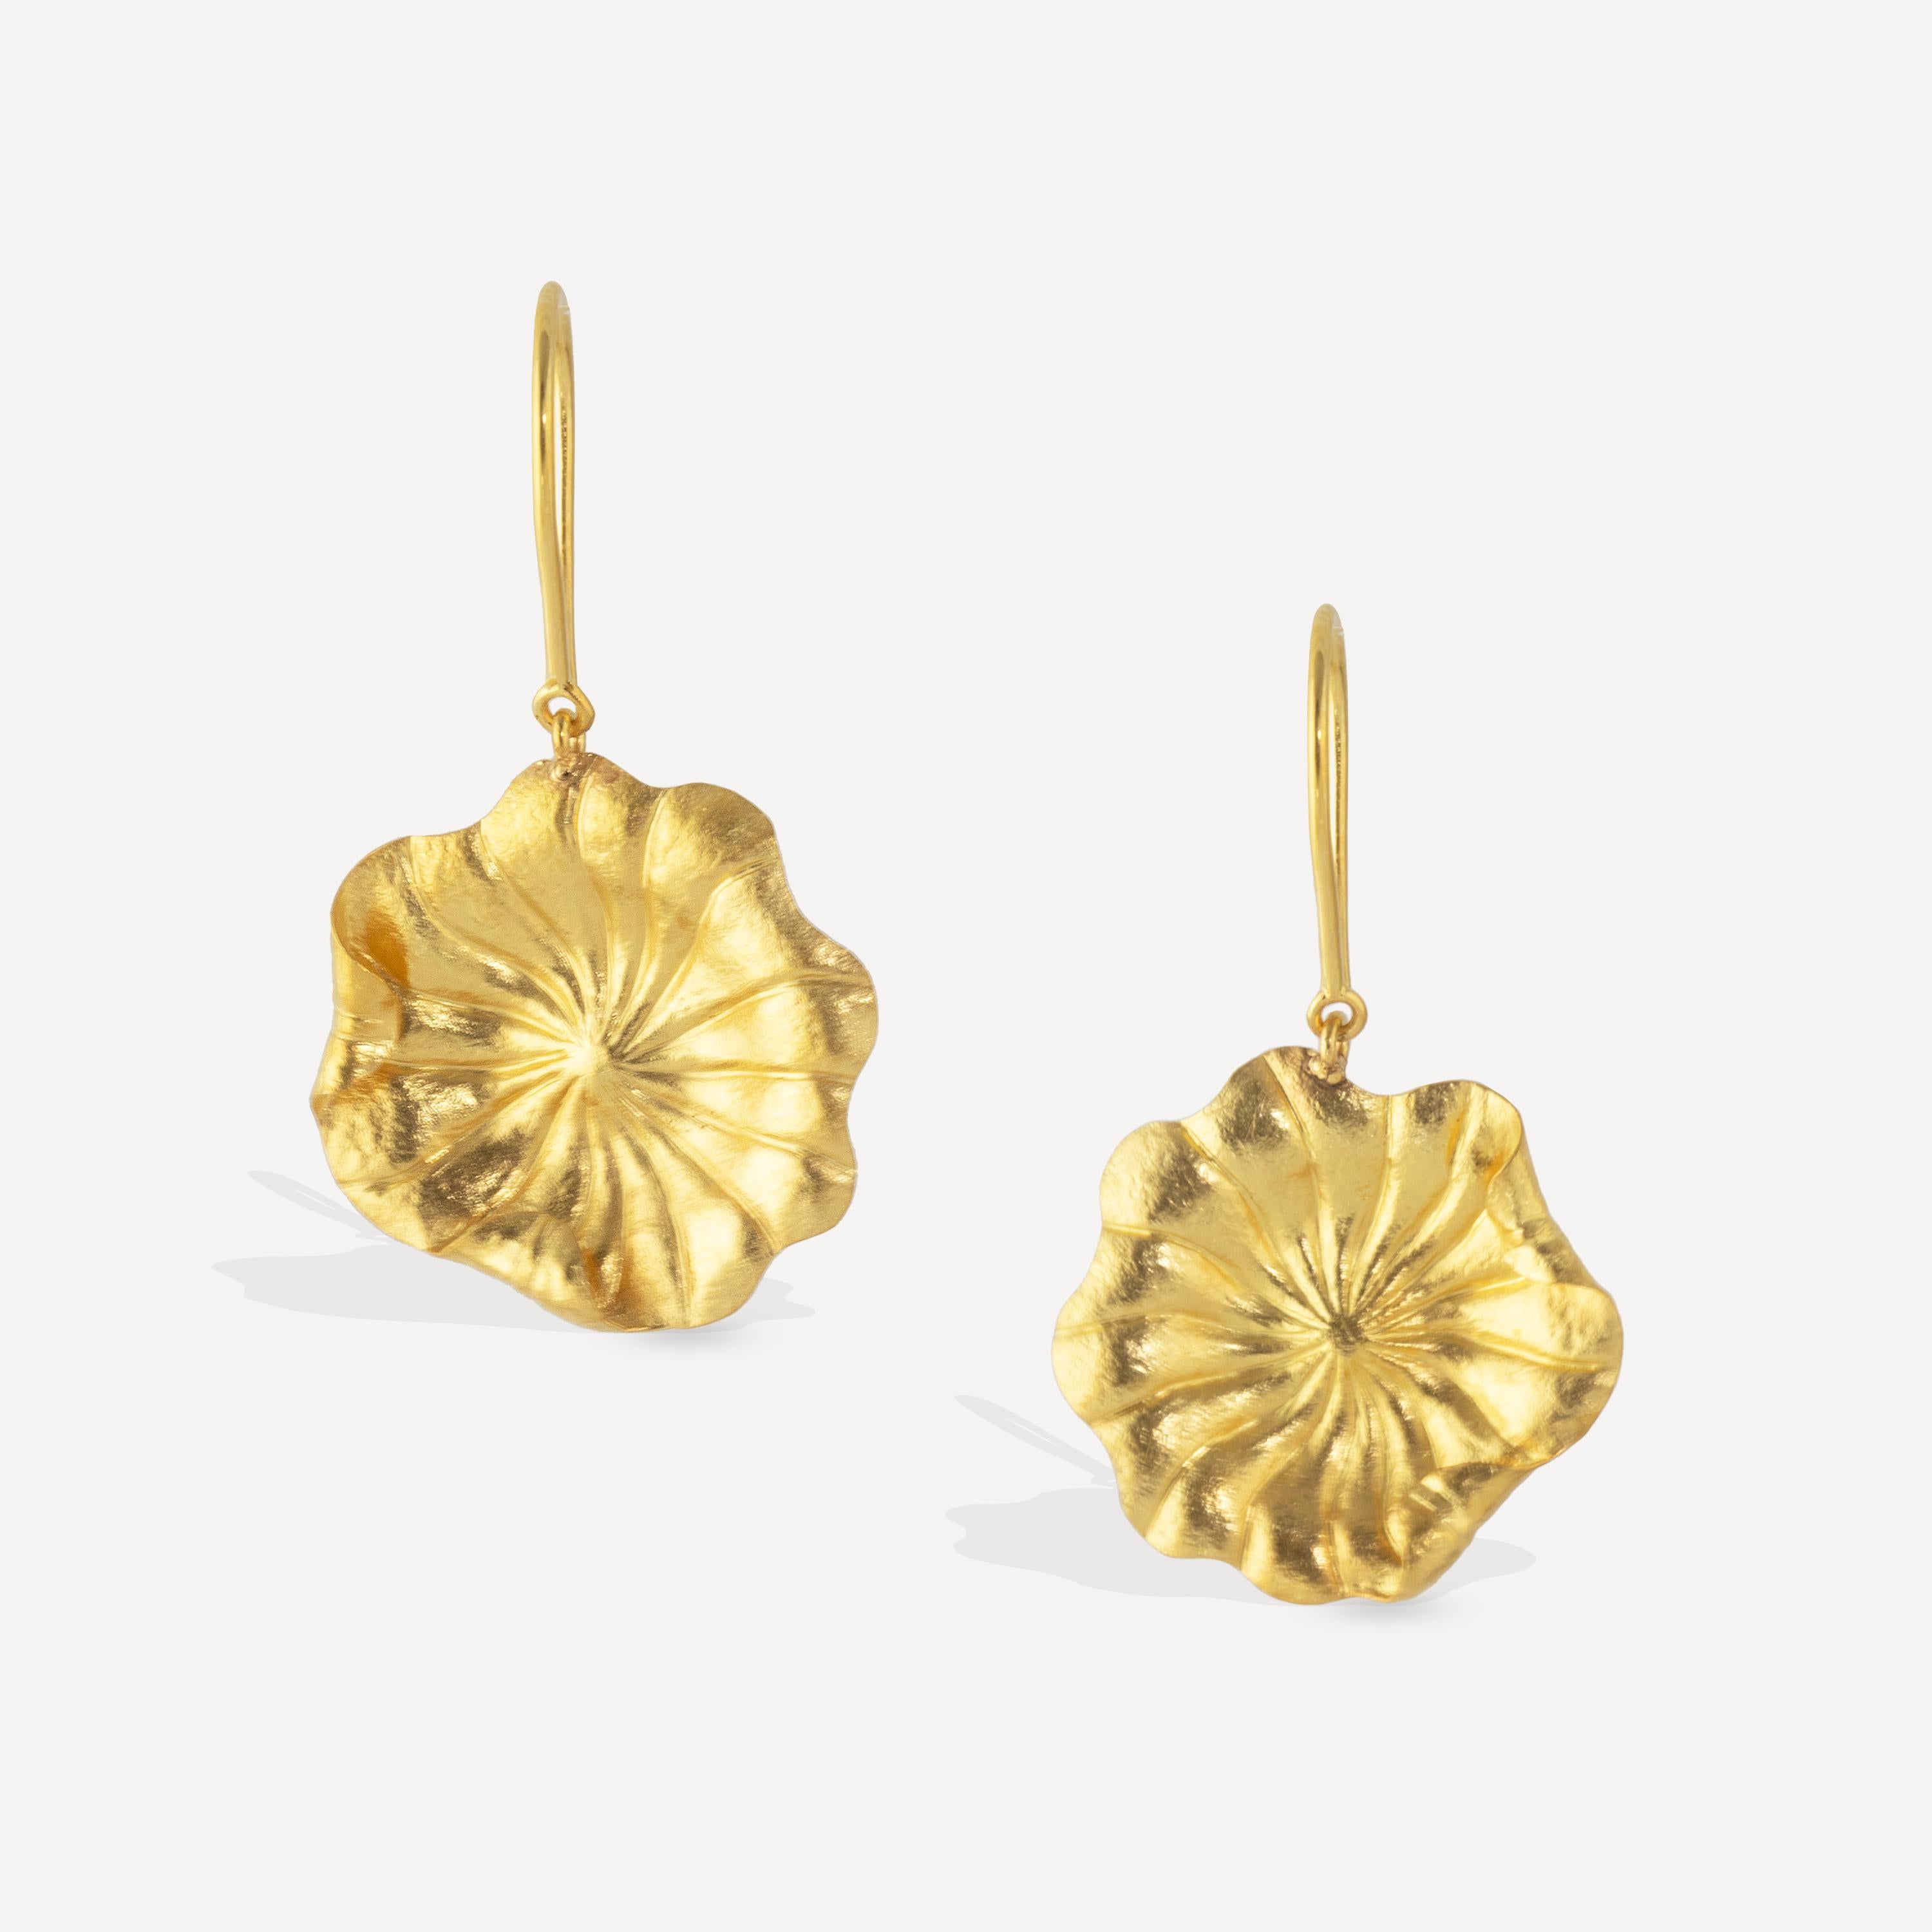 Ico & the Bird Fine Jewelry has collaborated with Turquoise Mountain Myanmar on a new collection celebrating the Lotus flower.
Each piece is handmade in Myanmar by master goldsmiths, trained in ancient techniques 

These earrings feature Lotus Leafs